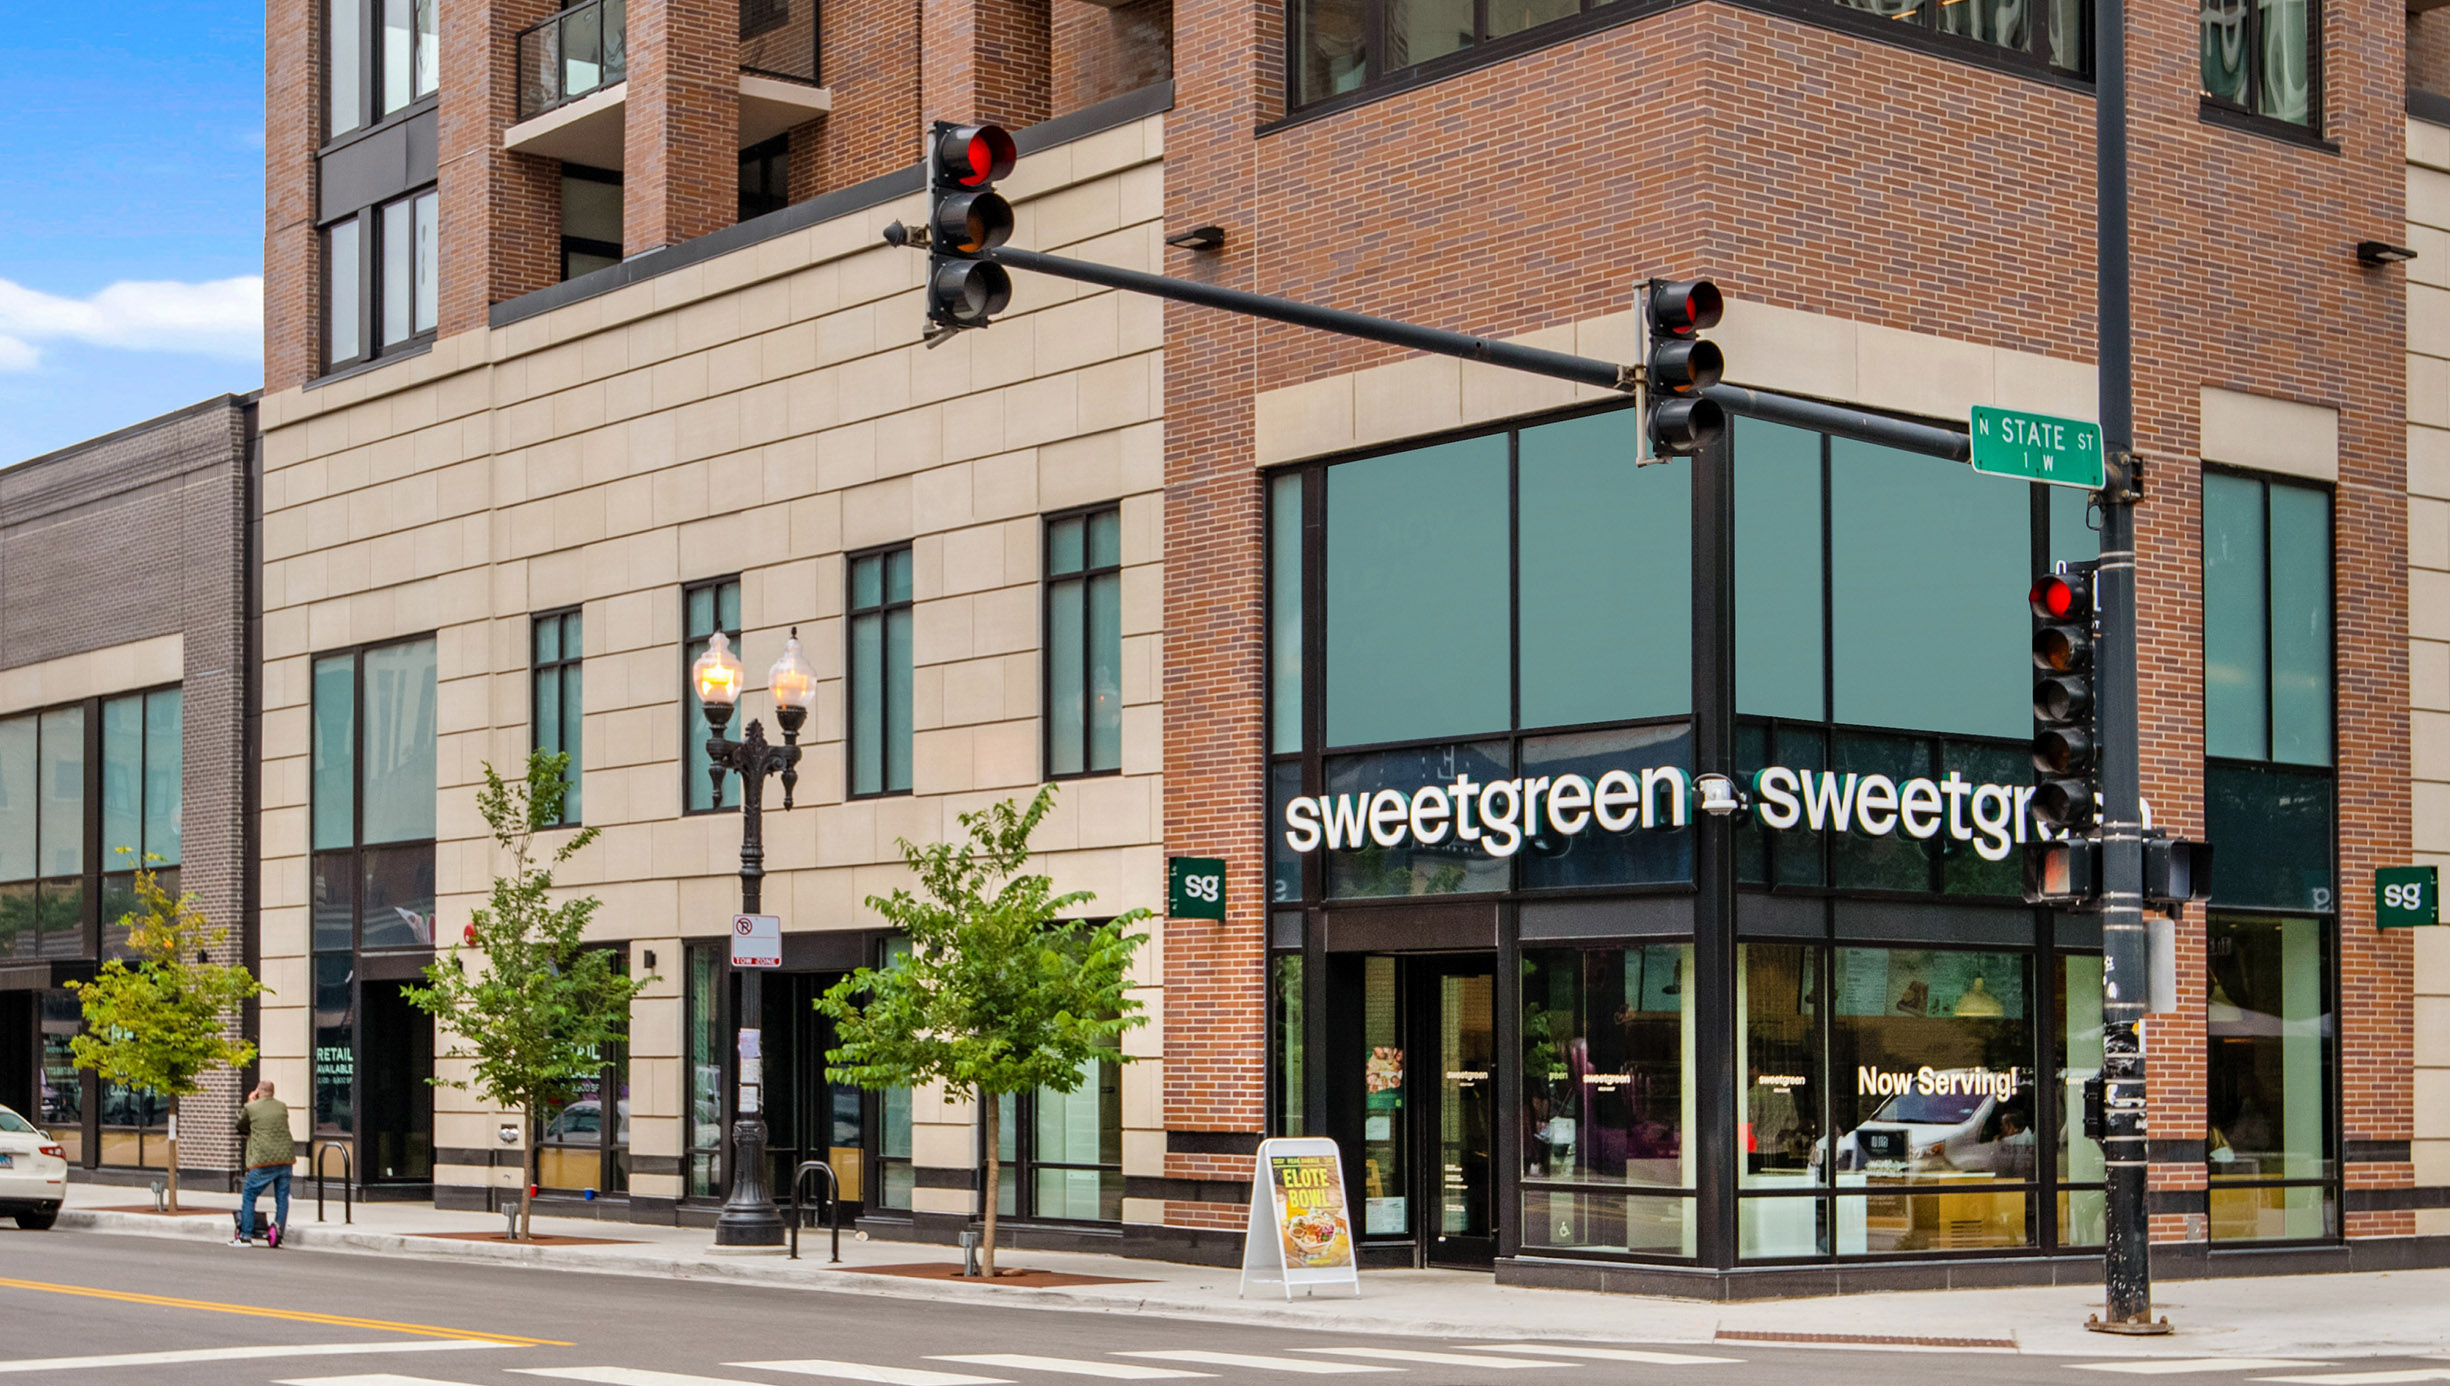 Commercial retail real estate in the Gold Coast neighborhood of Chicago, Gild luxury apartment building, Sweetgreen restaurant